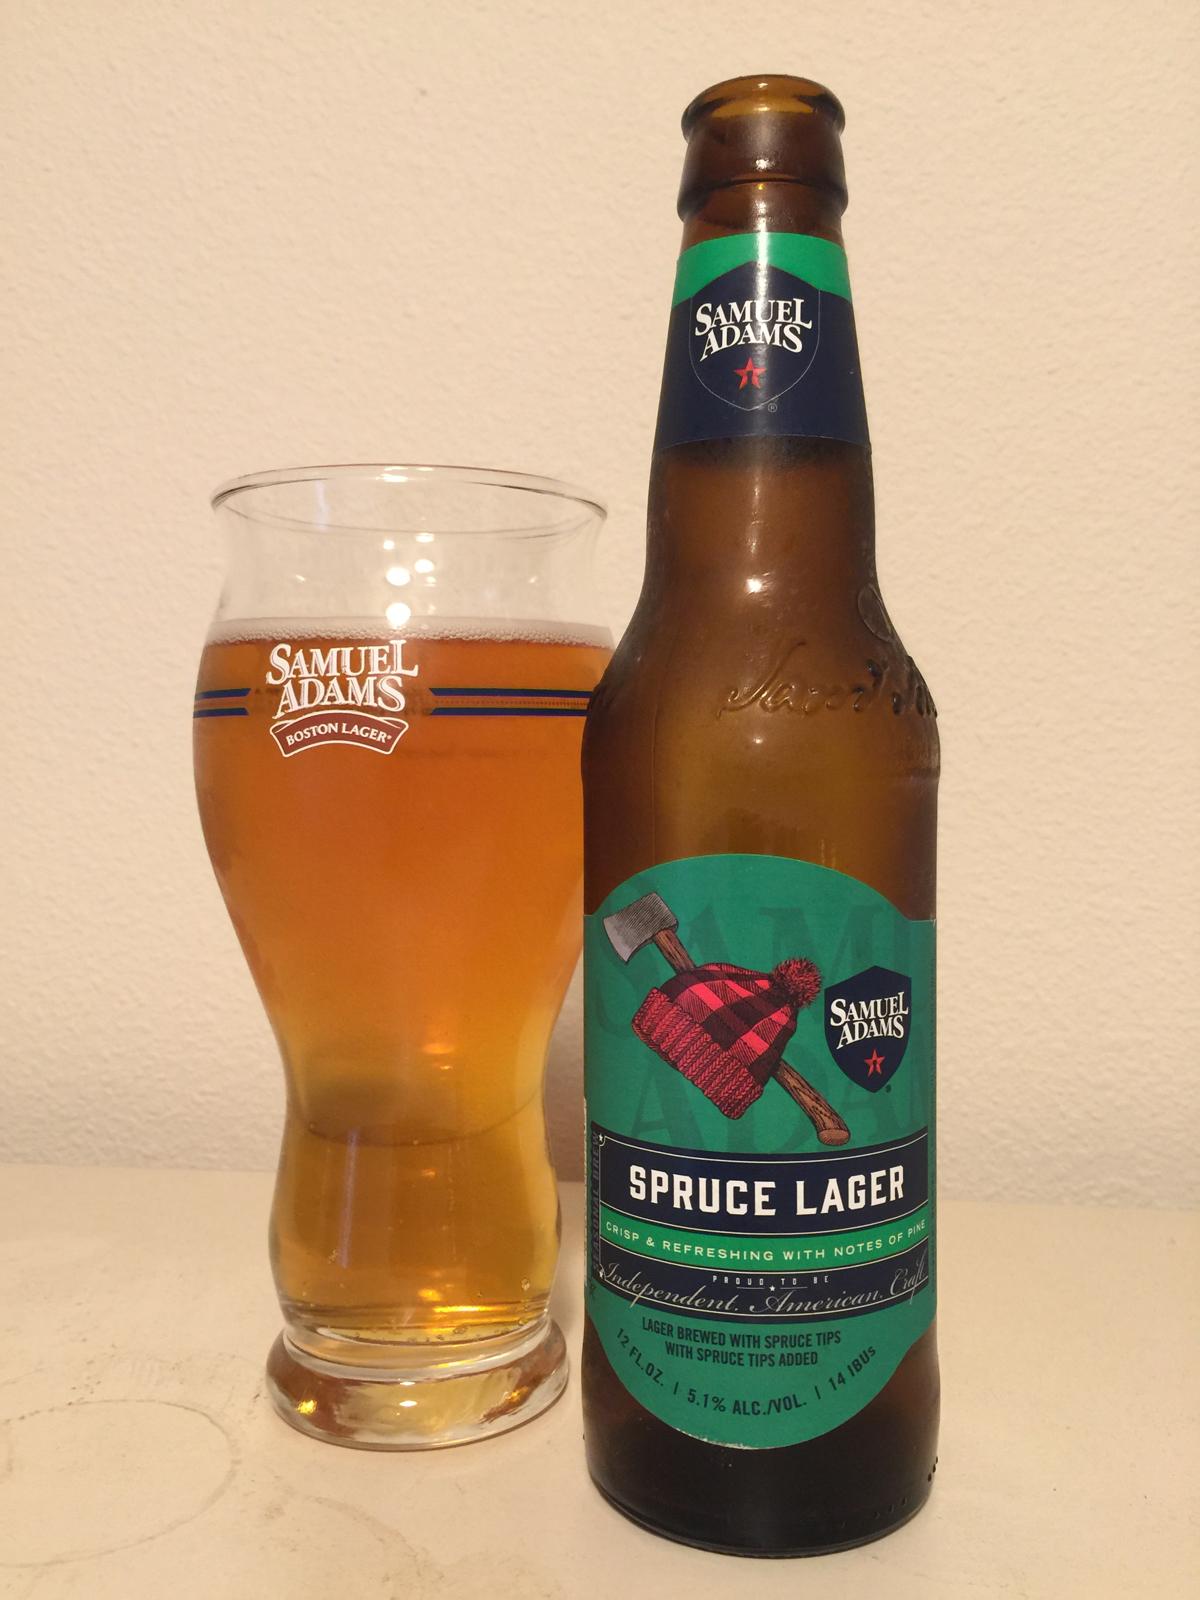 Spruce Lager